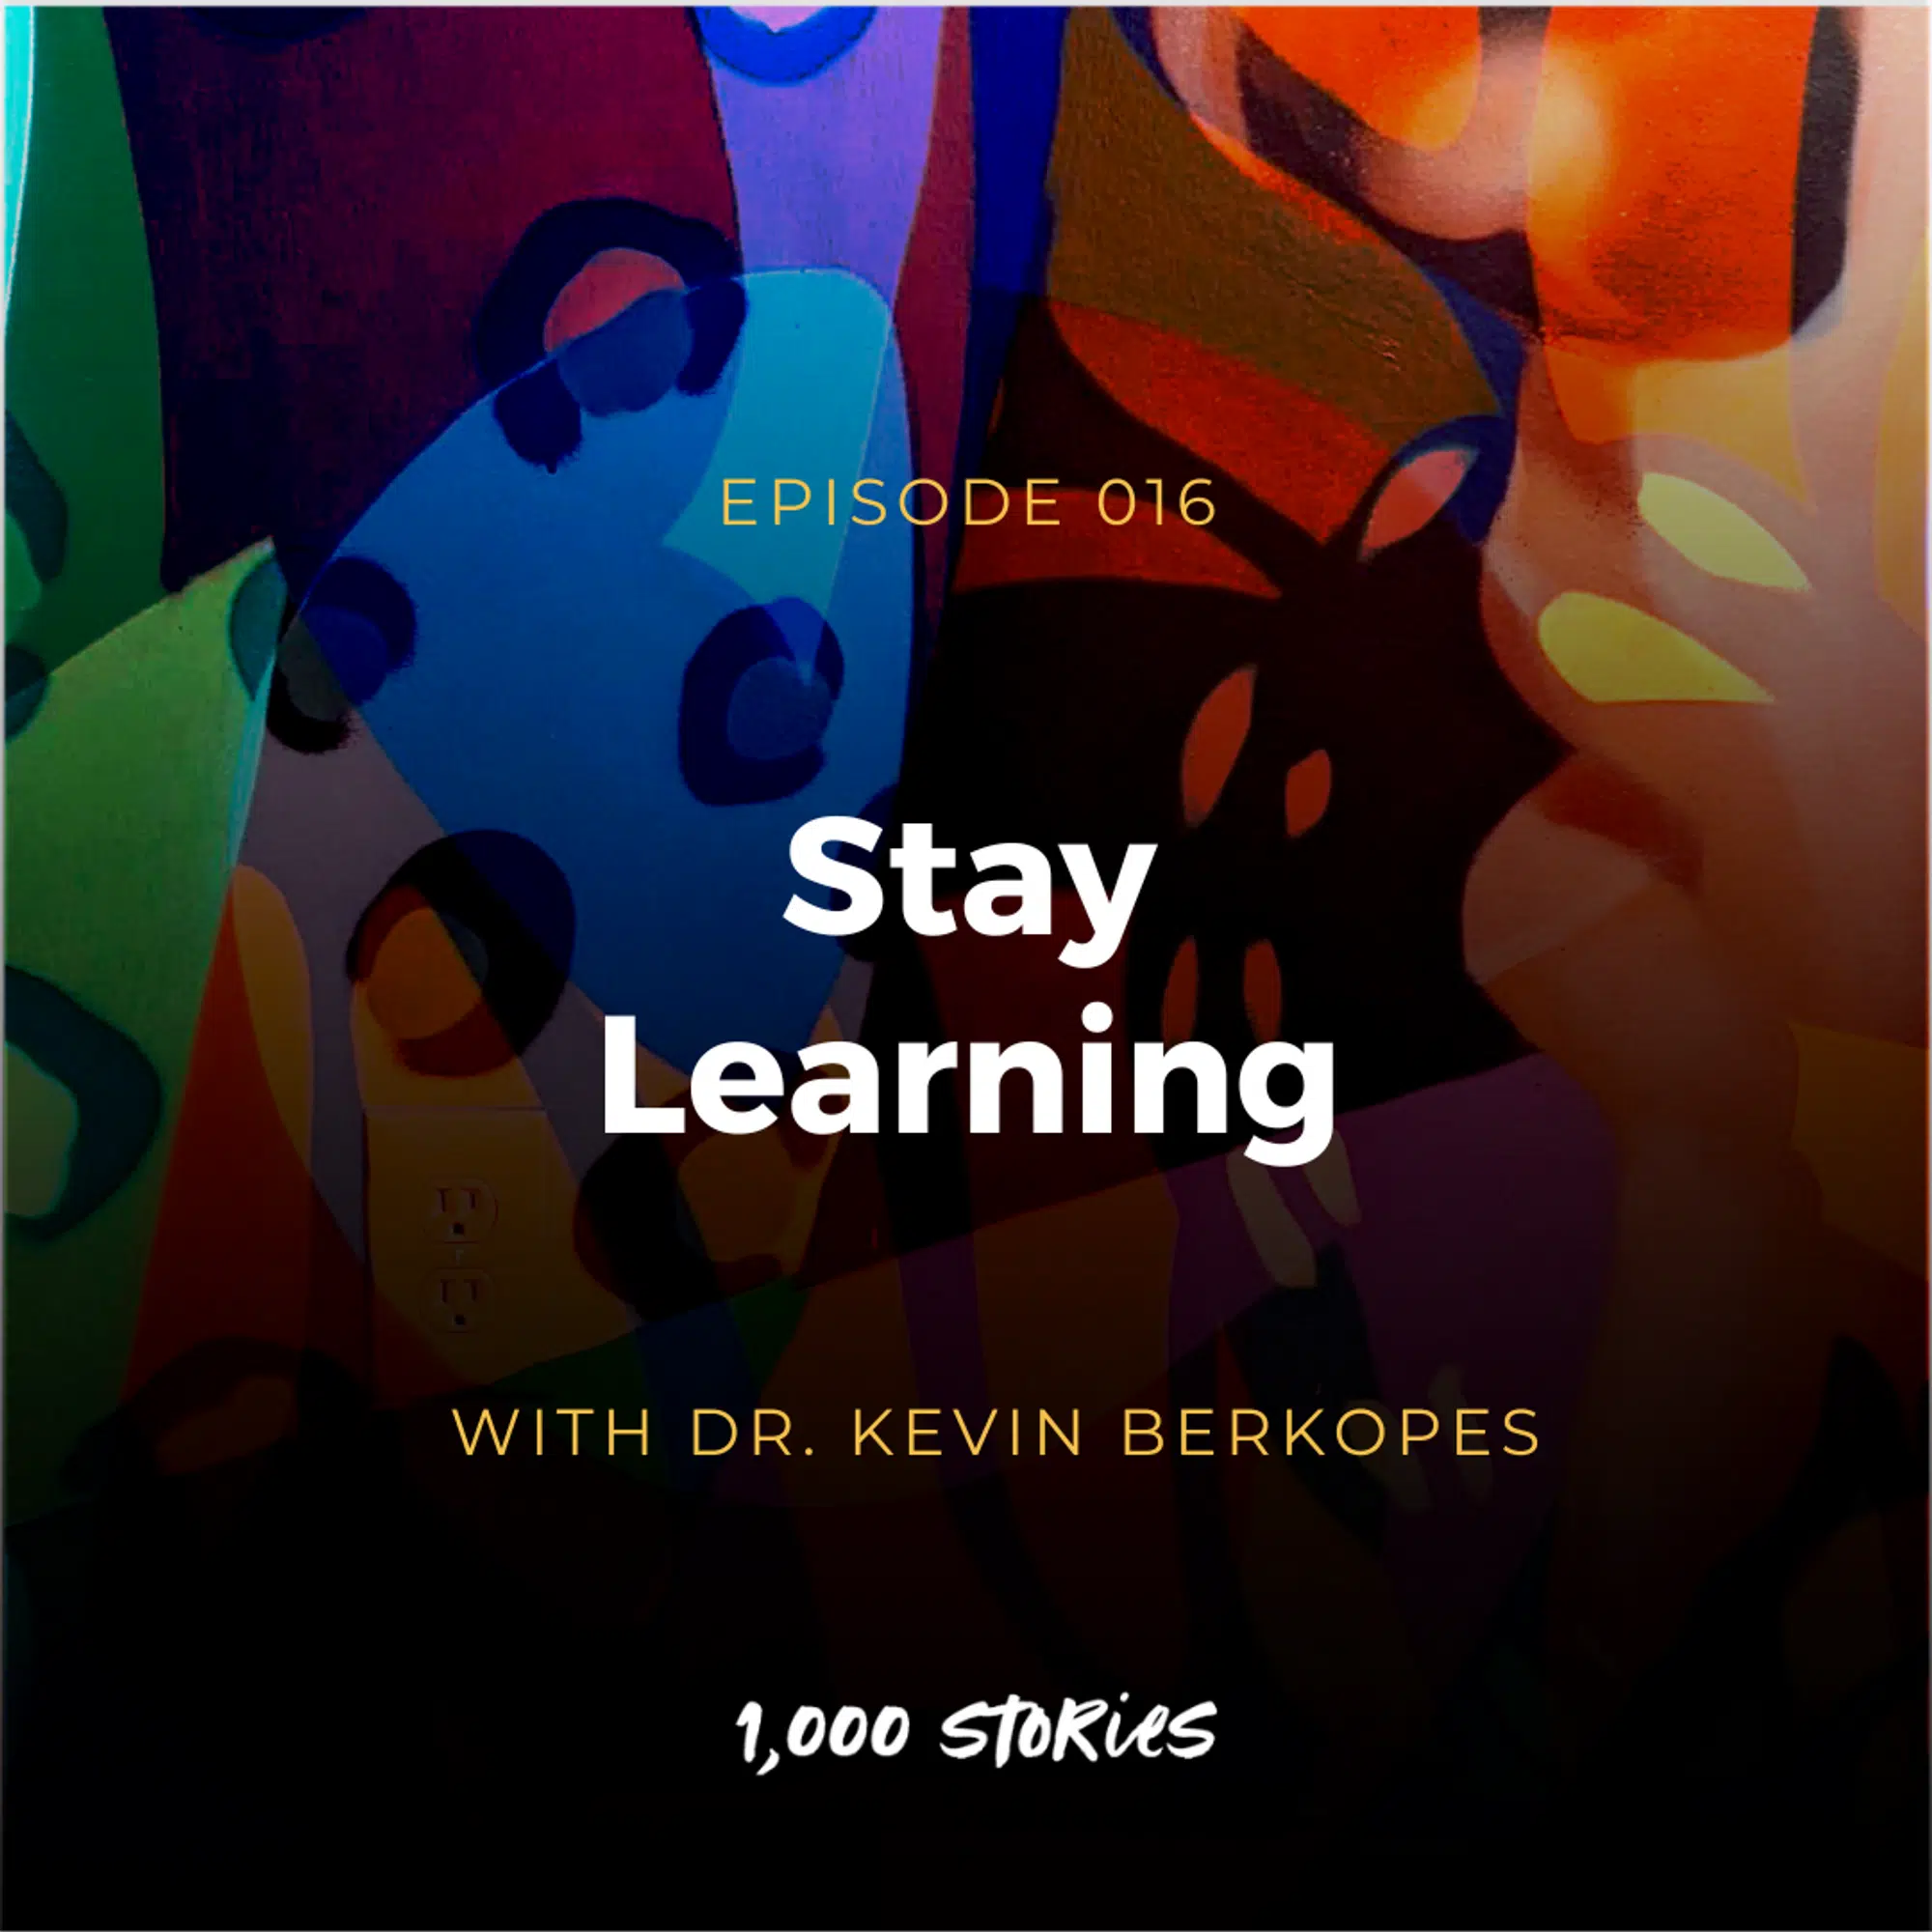 Stay Learning with Dr. Kevin Berkopes